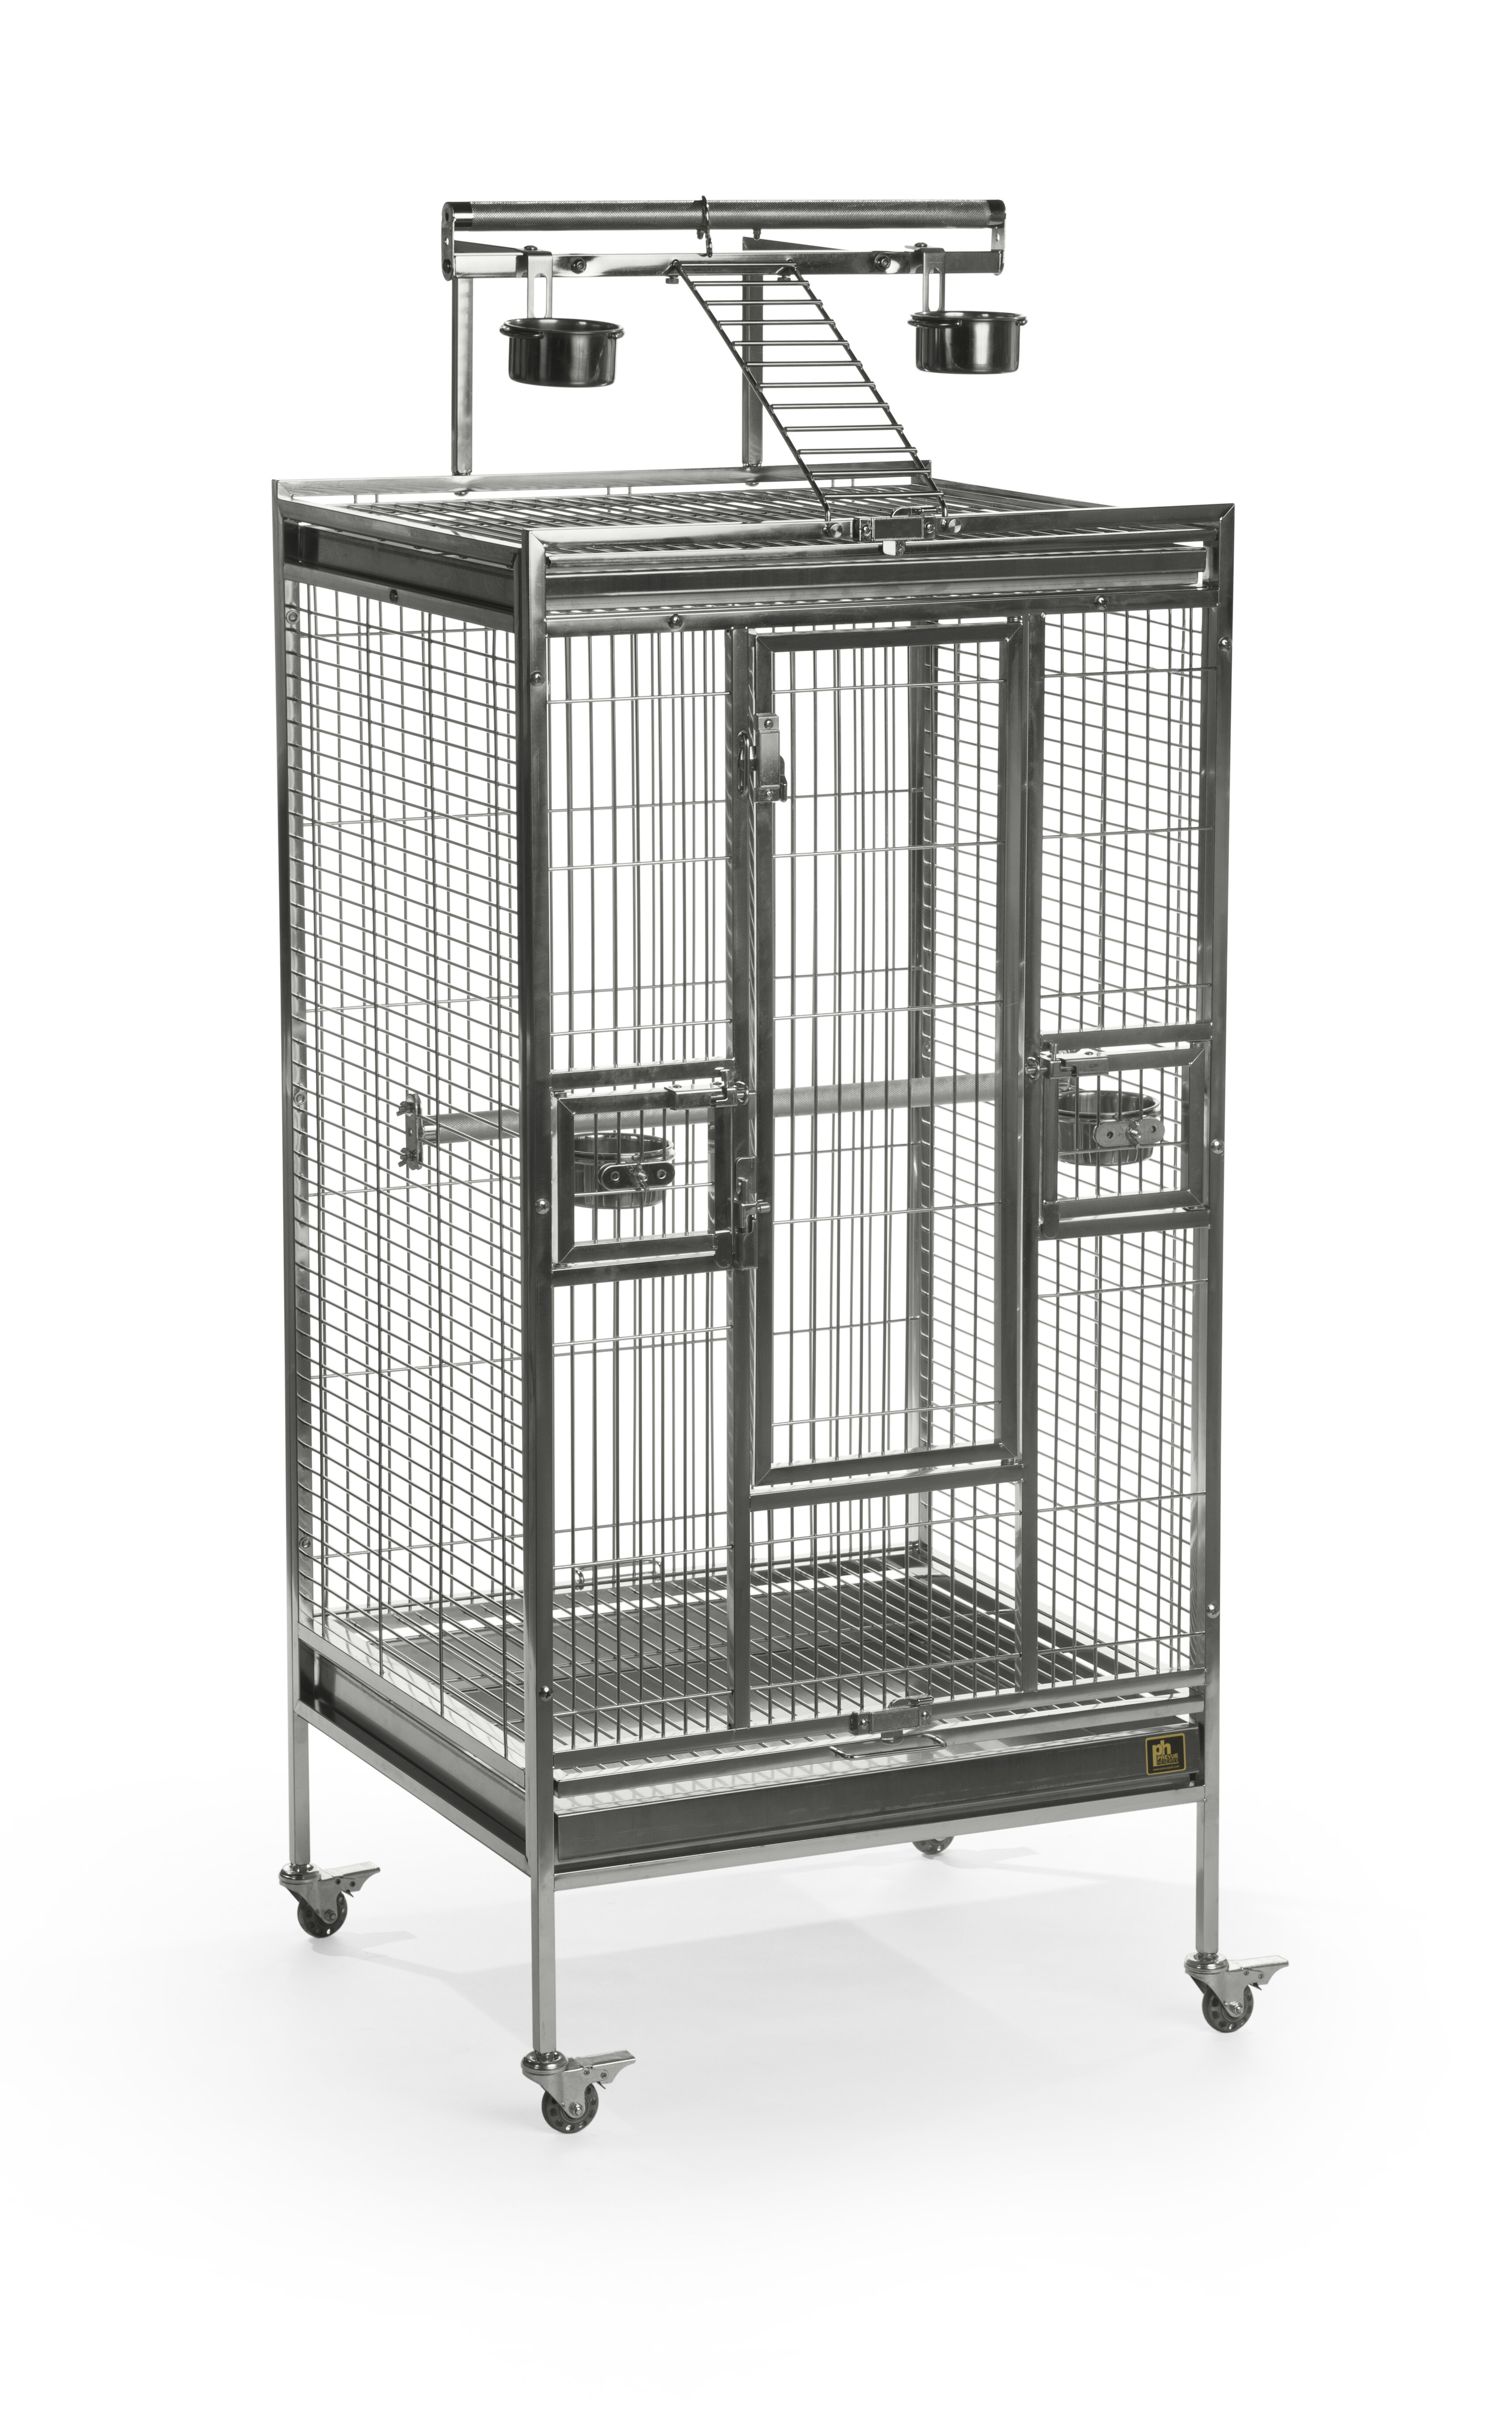 bird cage with playtop